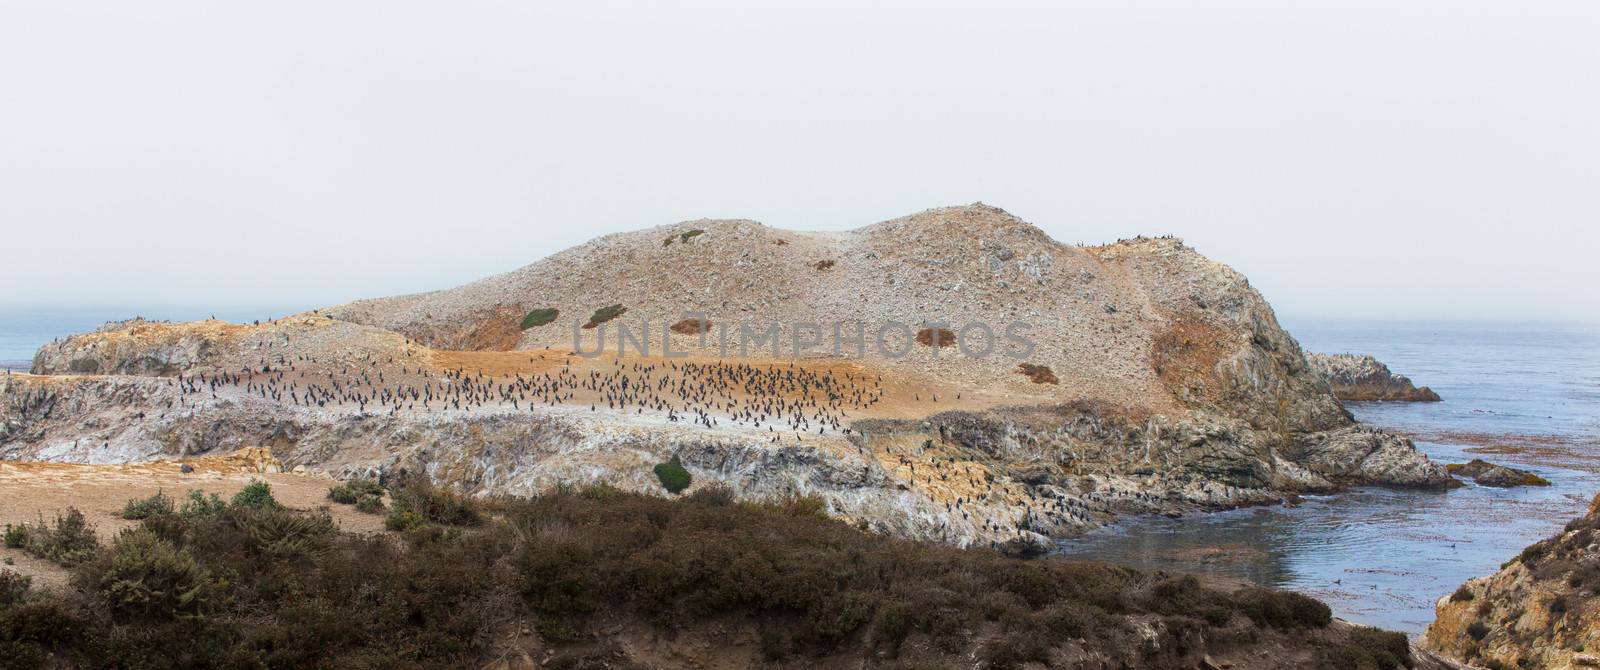 Brandt's Cormorants at Point Lobos by wolterk